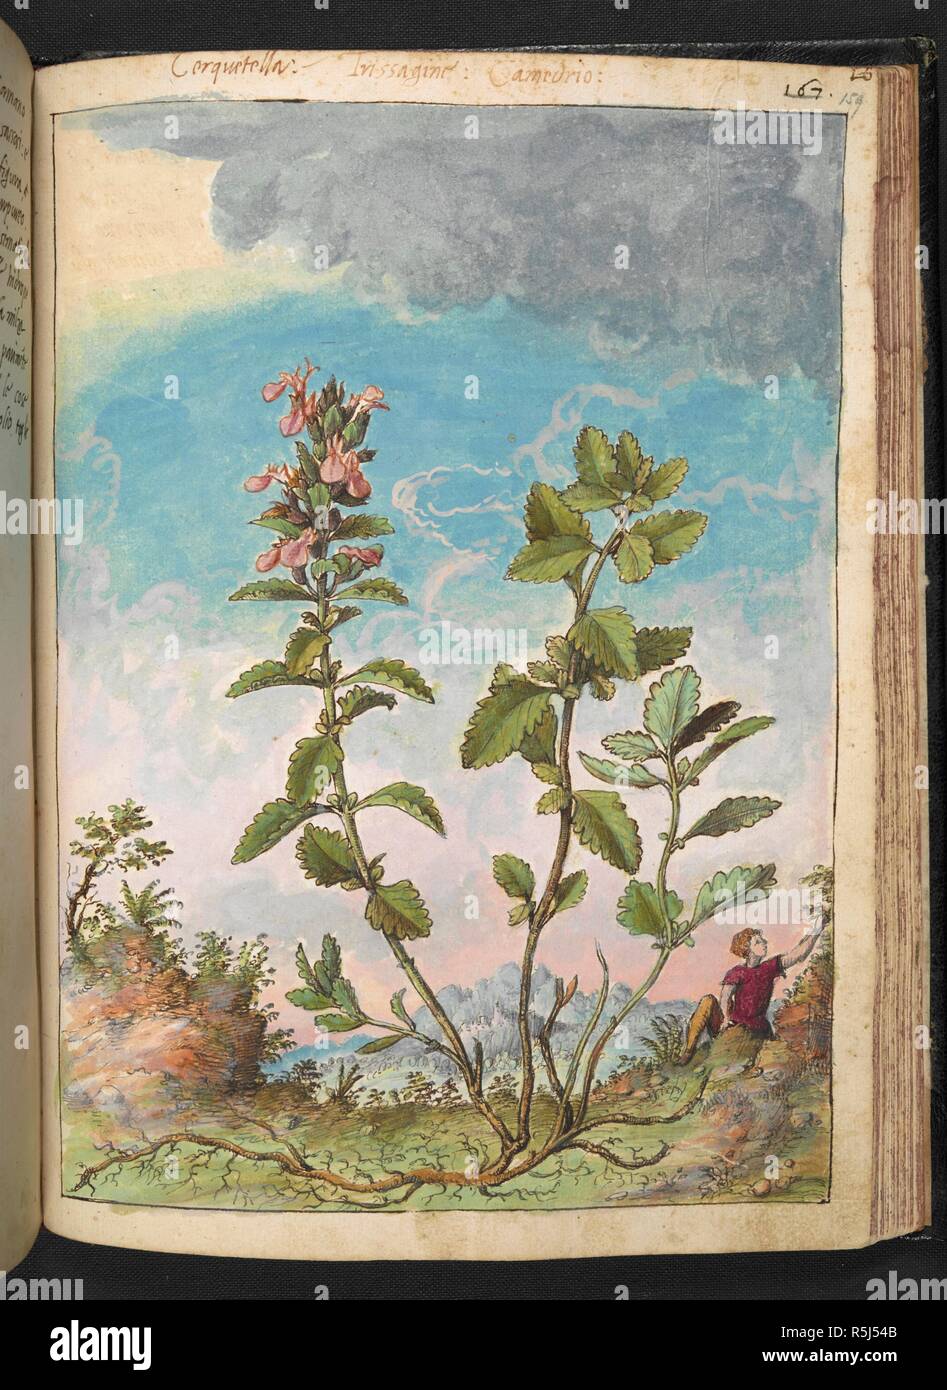 Cerquetella..'  Trissagine (Latin: Teucrium chamaedrys. Common name: Wall Germander).  Camedrio (The common germander.) . Coloured drawings of plants, copied from nature in the Roman States, by Gerardo Cibo. Vol. I. Pietro Andrea Mattioli, Physician, of Siena: Extracts from his edition of Dioscorides' 'de re Medica':. Italy, c. 1564-1584. Source: Add. 22332 f.159. Language: Italian. Author: Cibo, Gheraldo. Stock Photo